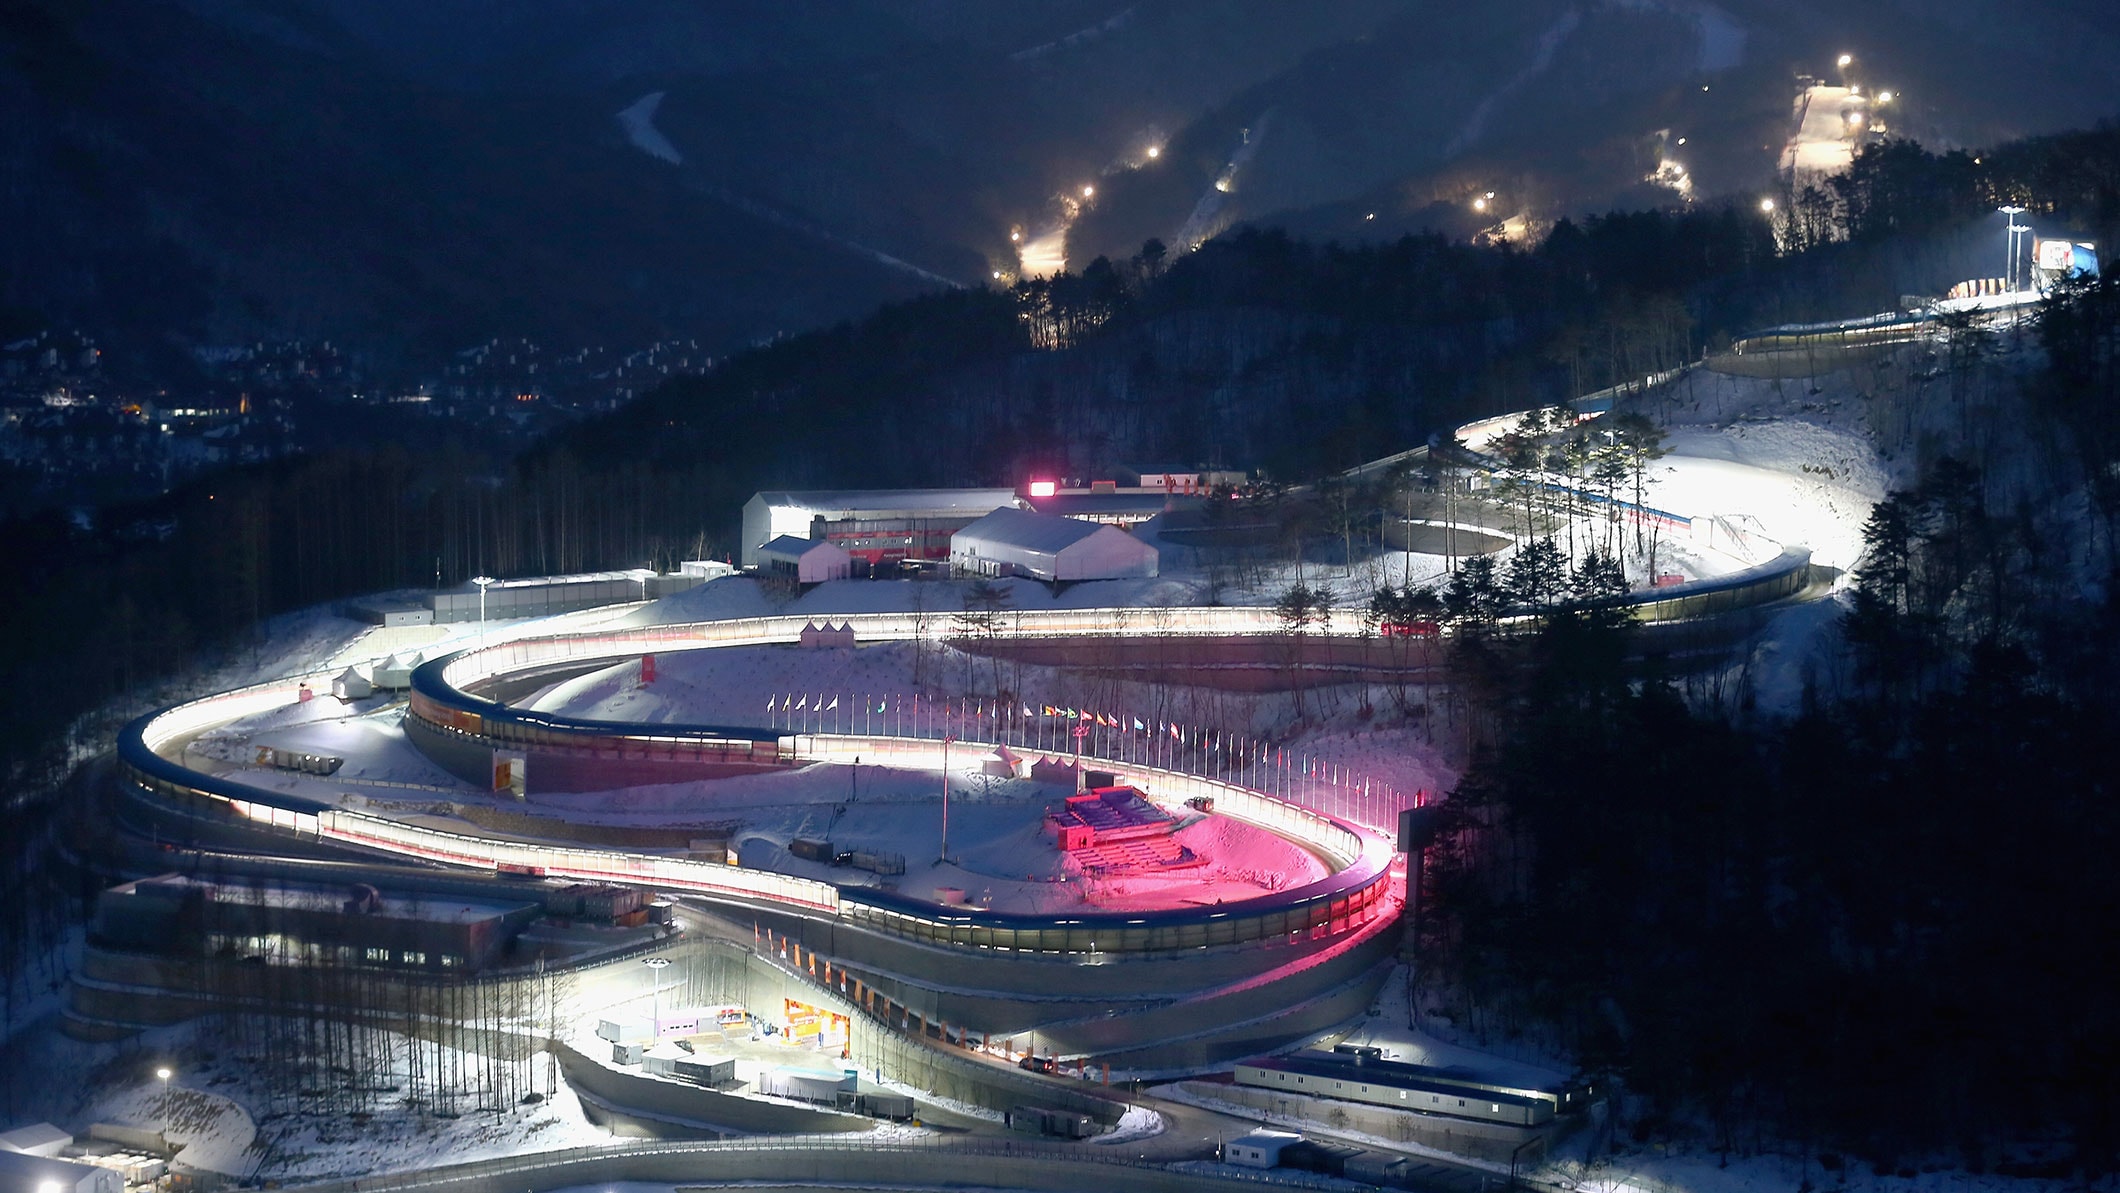 PyeongChang 2018 continues its legacy of expanding winter sport in Asia